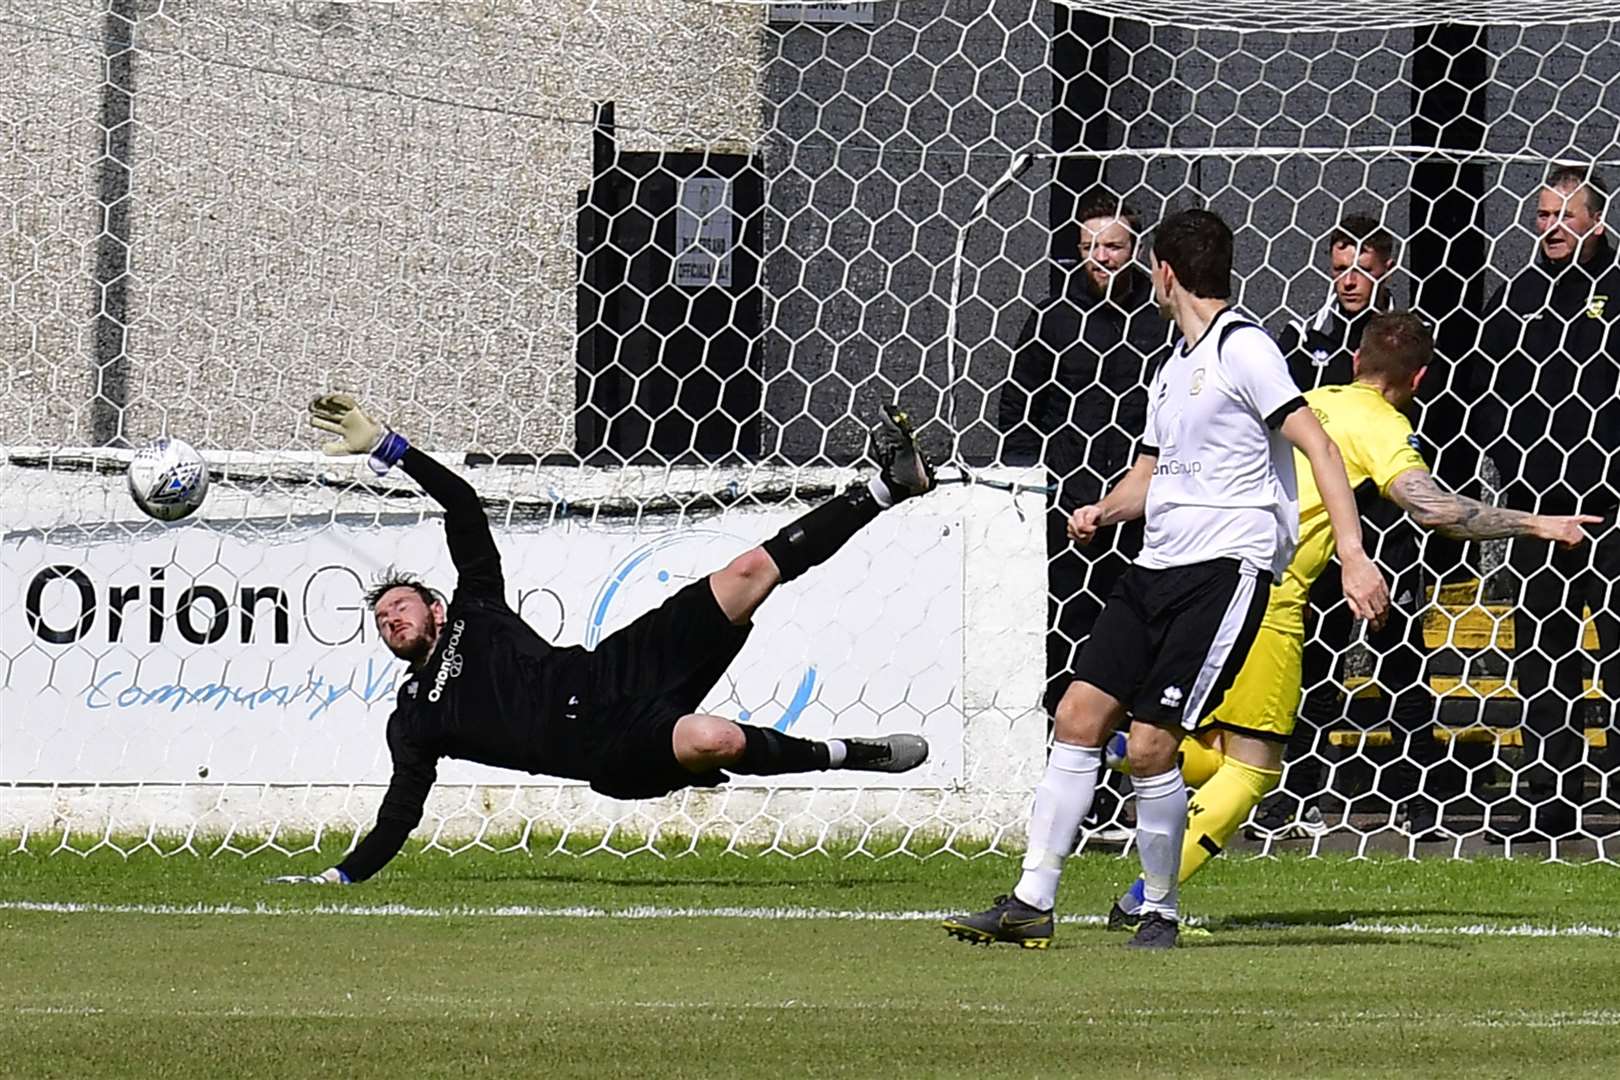 Craig Gunn turns to celebrate as his header beats Clach keeper Douglas Maclennan to open the scoring for Wick Academy during their 2-1 win. Picture: Mel Roger